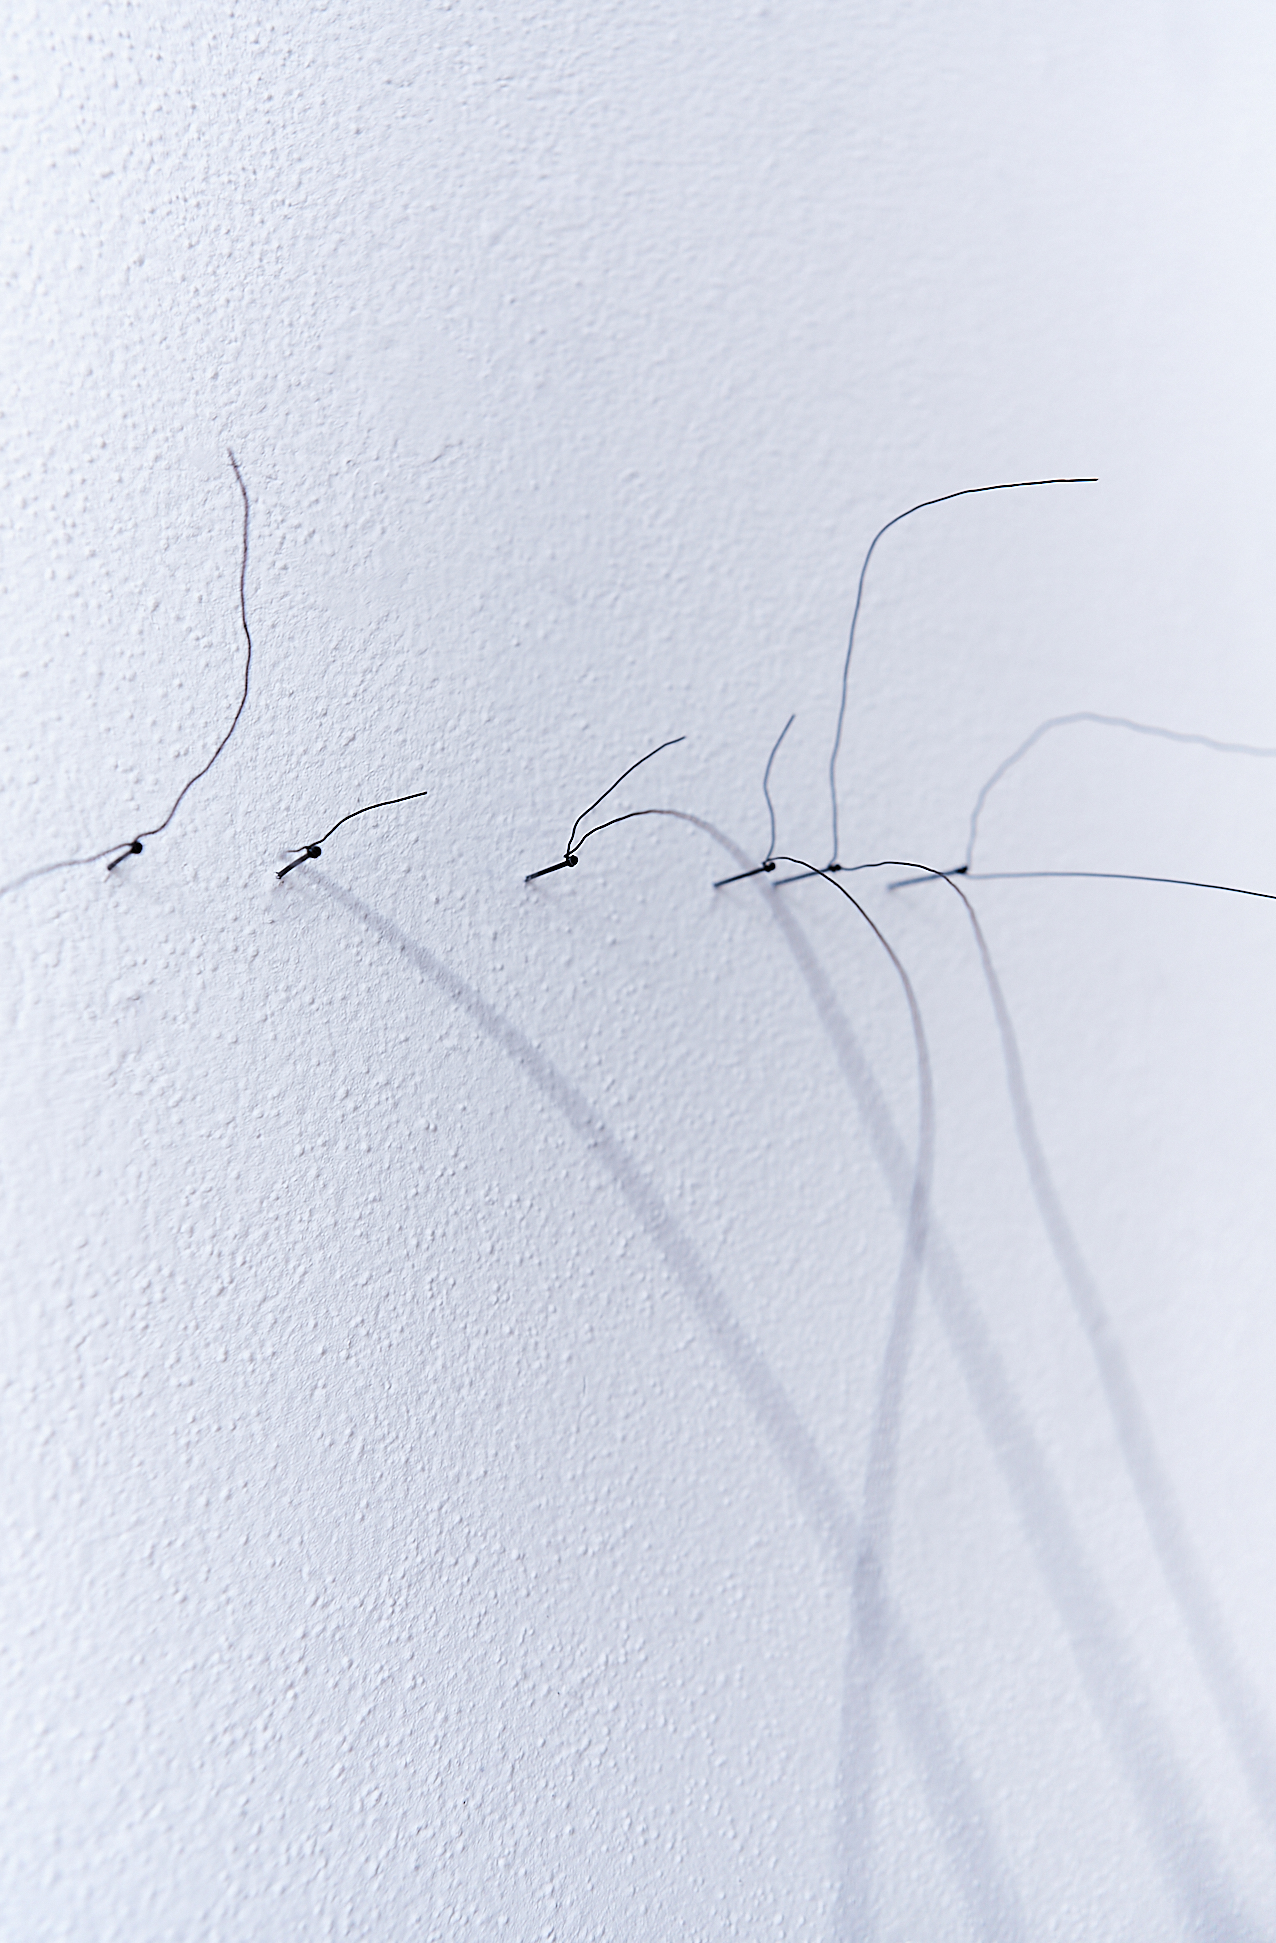 six black nails in a white wall. Blurry black lines are attached to the nails in the wall